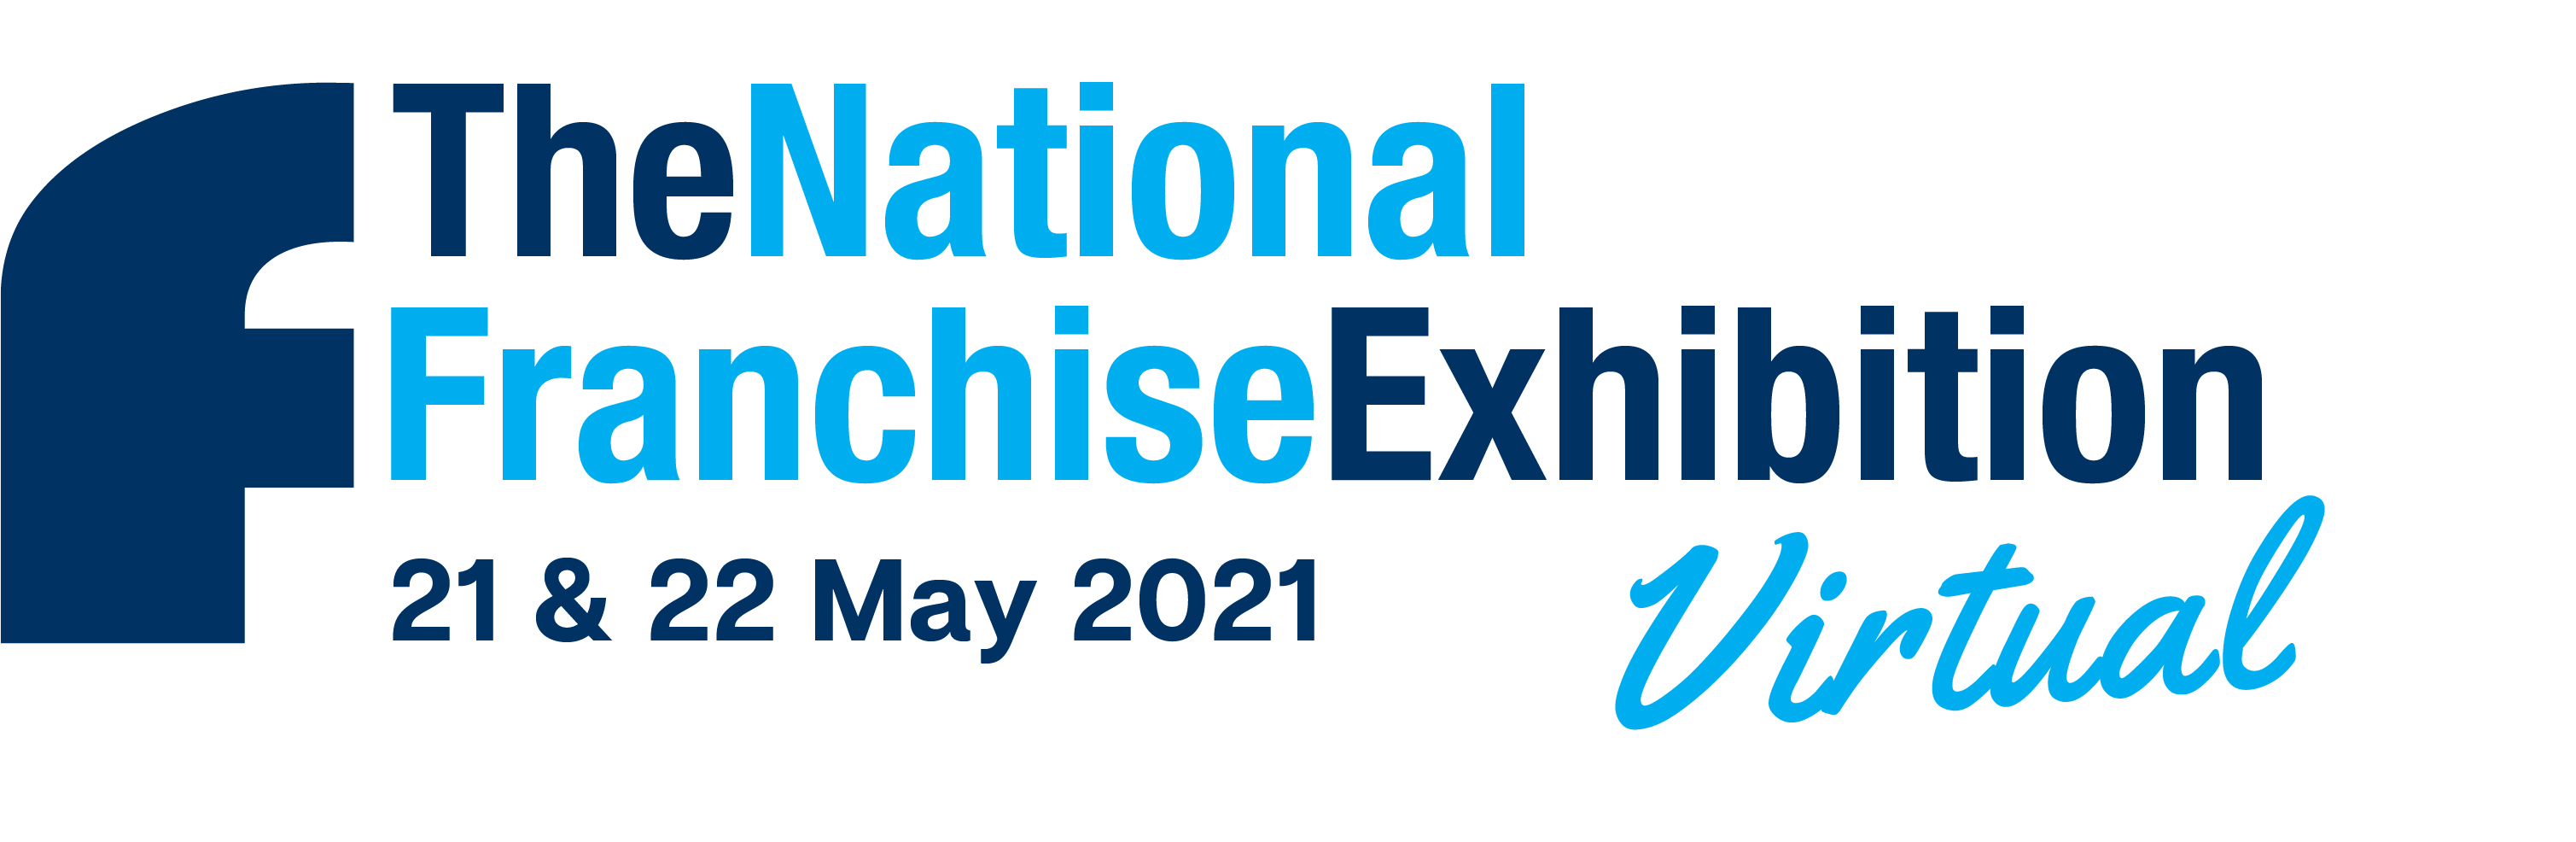 The National Franchise Exhibition Virtual 2021